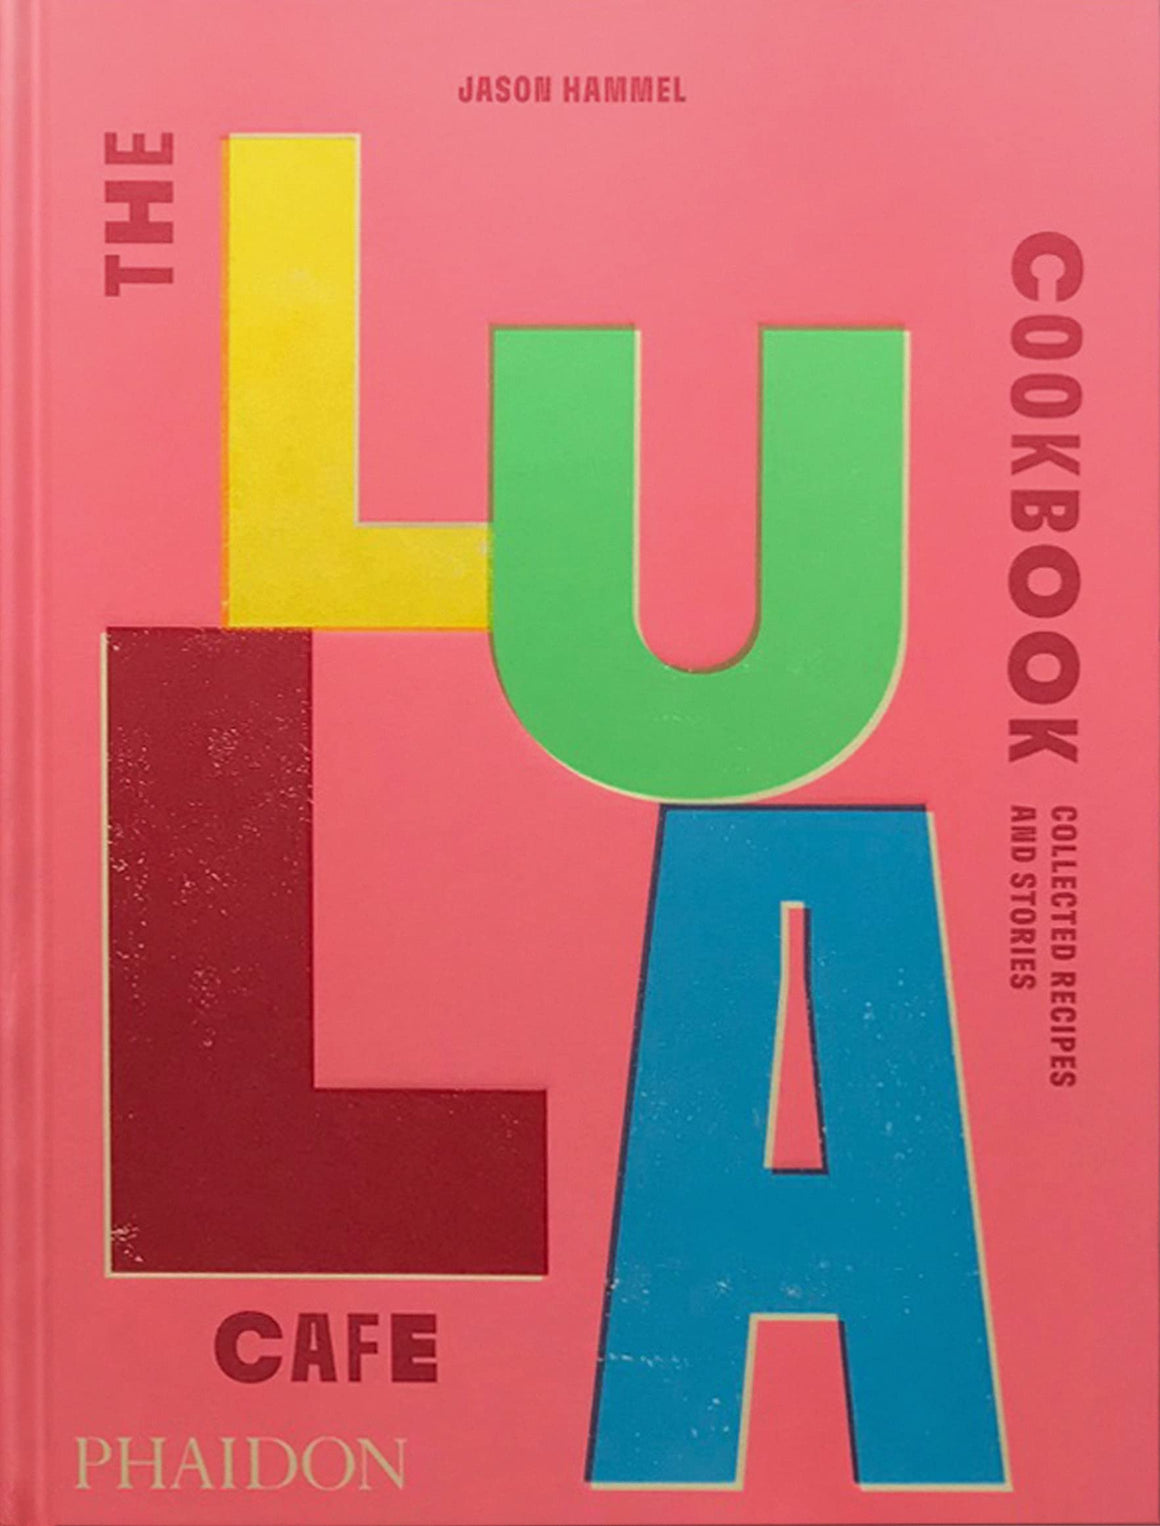 The Lula Cafe Cookbook: Collected Recipes and Stories (Jason Hammel)